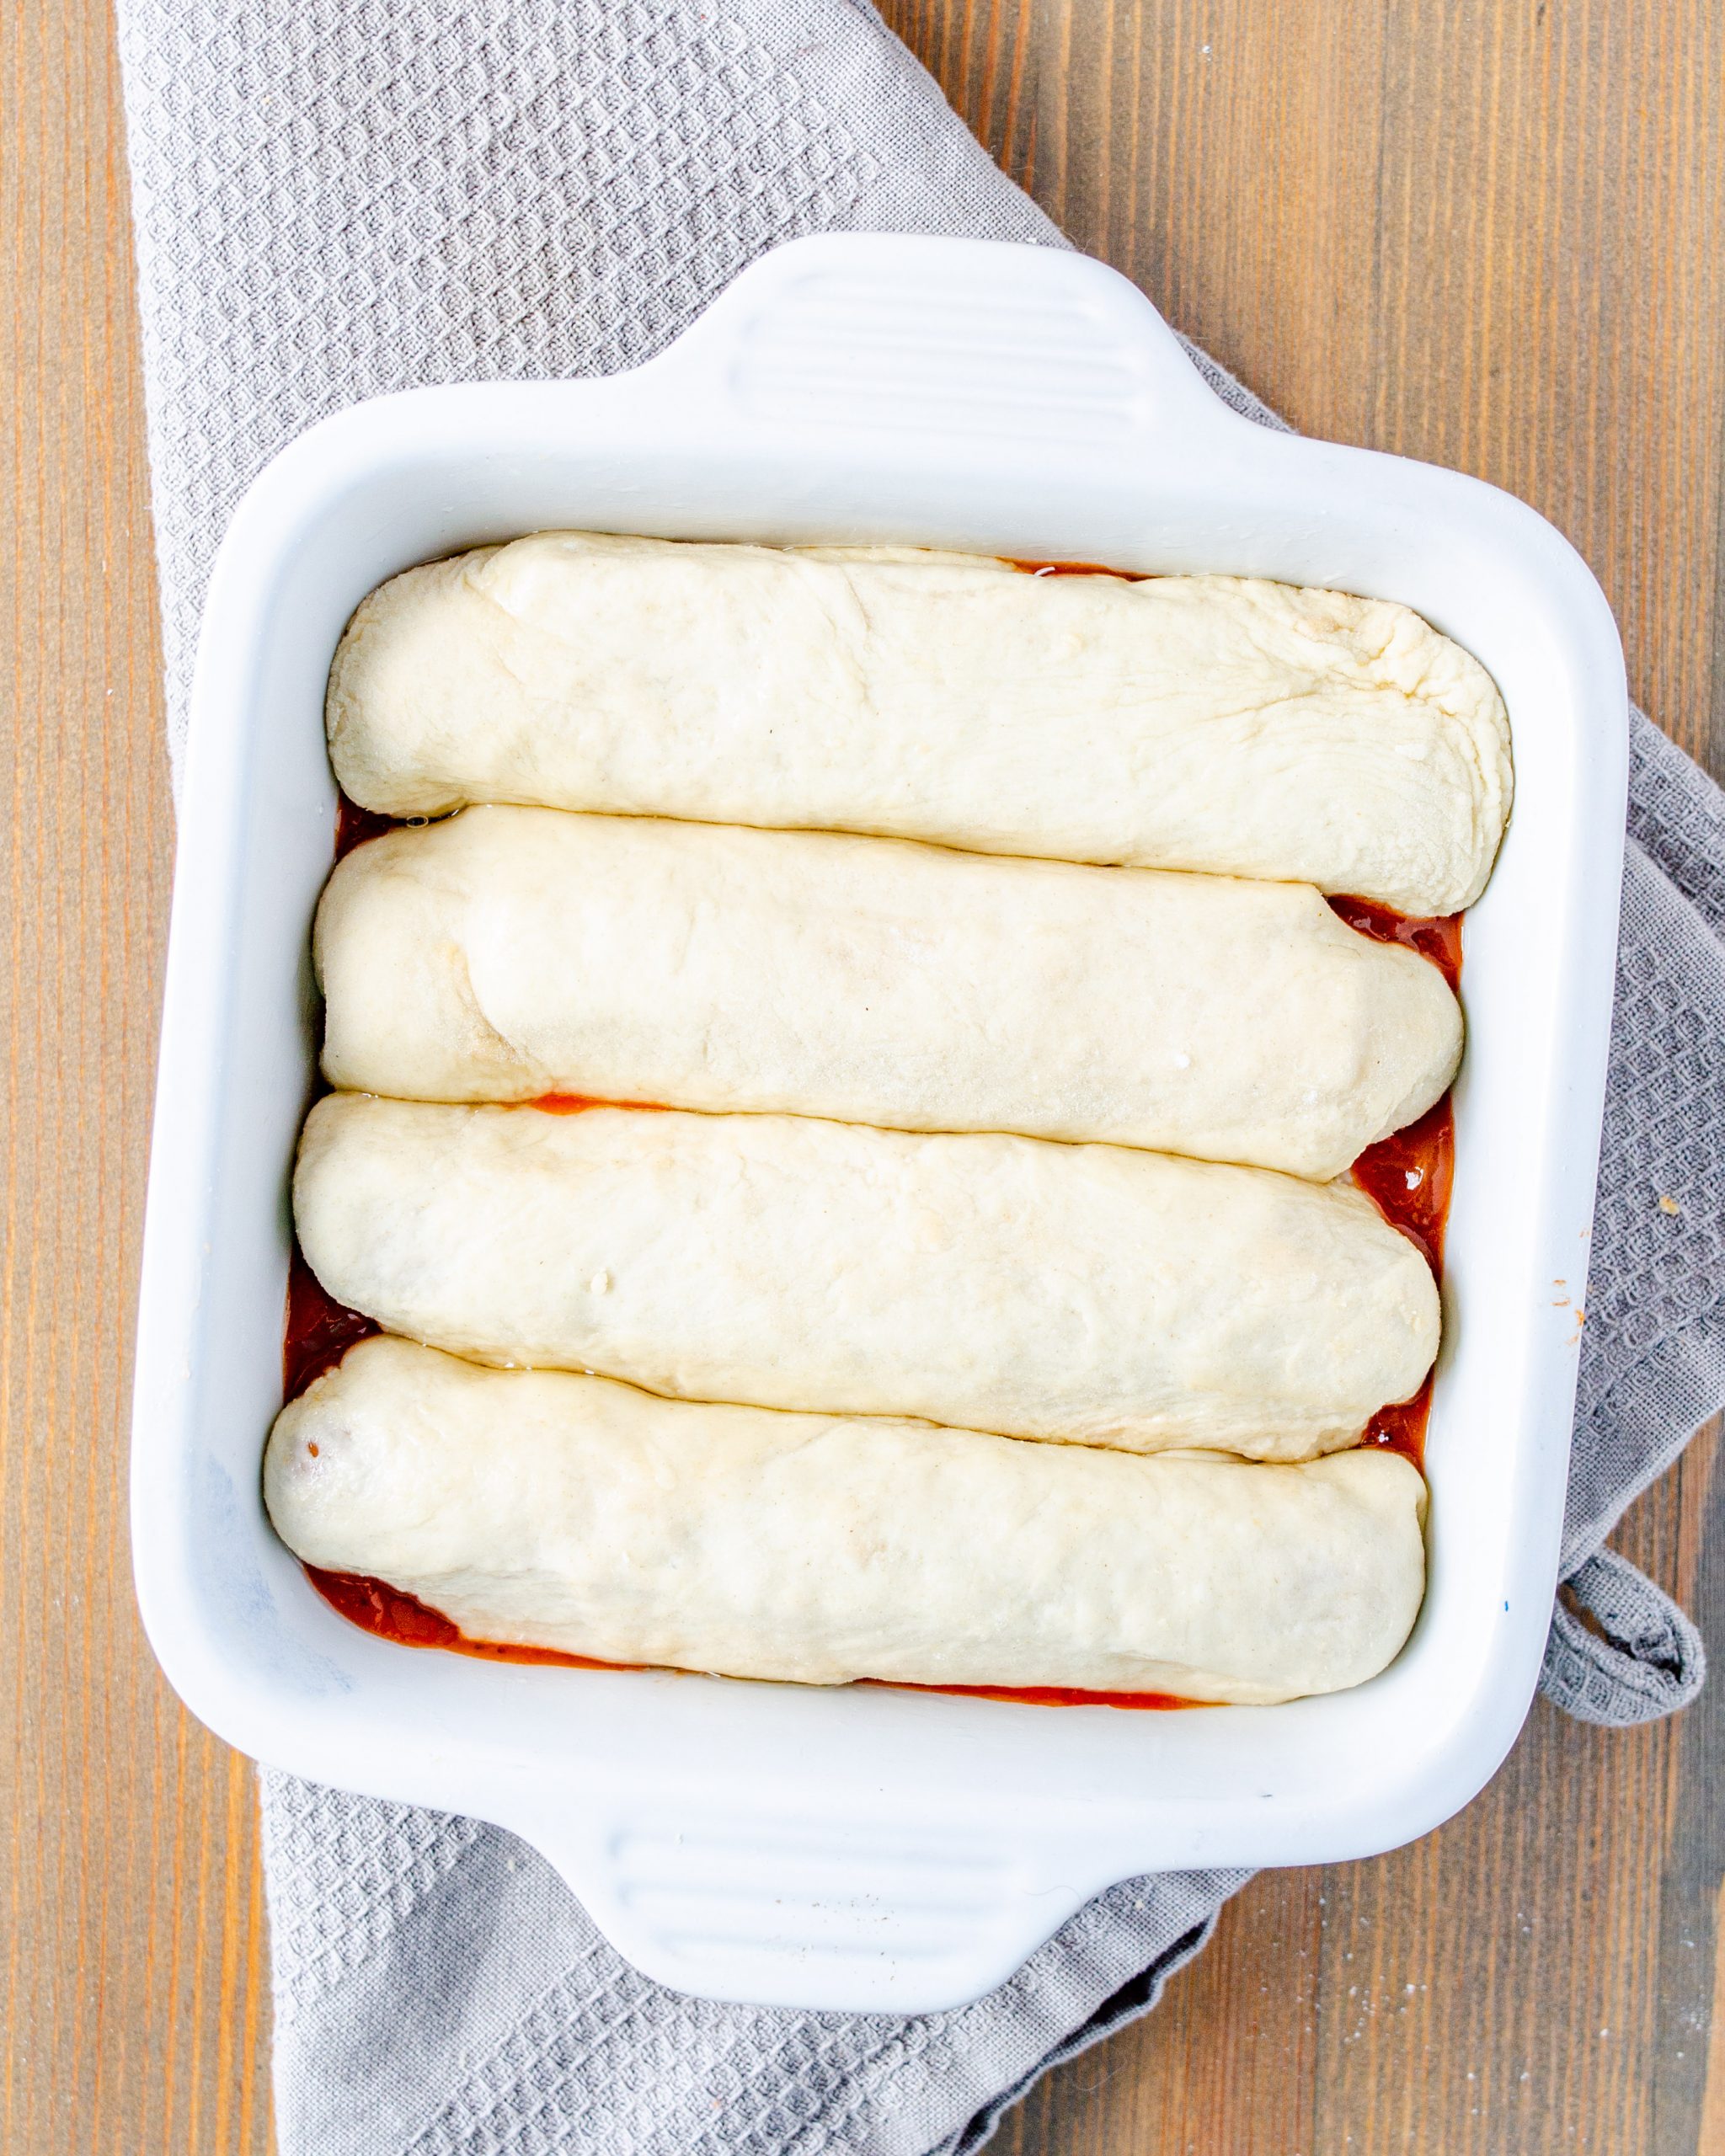 Place the wrapped hot dogs into the baking dish on top of the hot chili sauce and bake for 20-25 minutes until cooked through and golden brown on top.